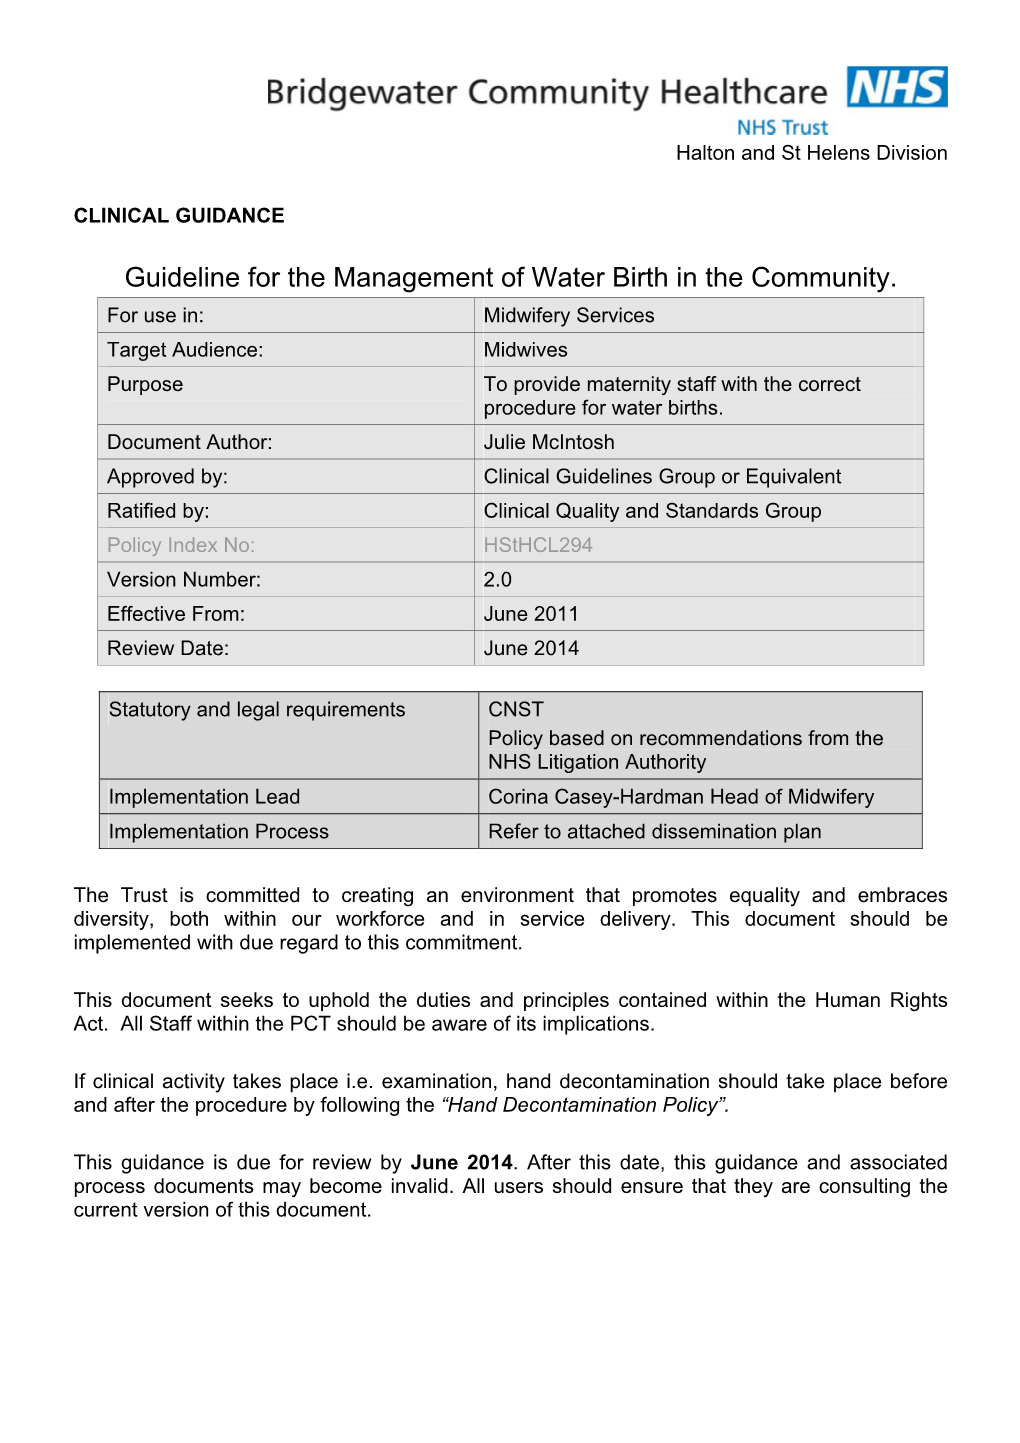 Guideline for the Management of Water Birth in the Community